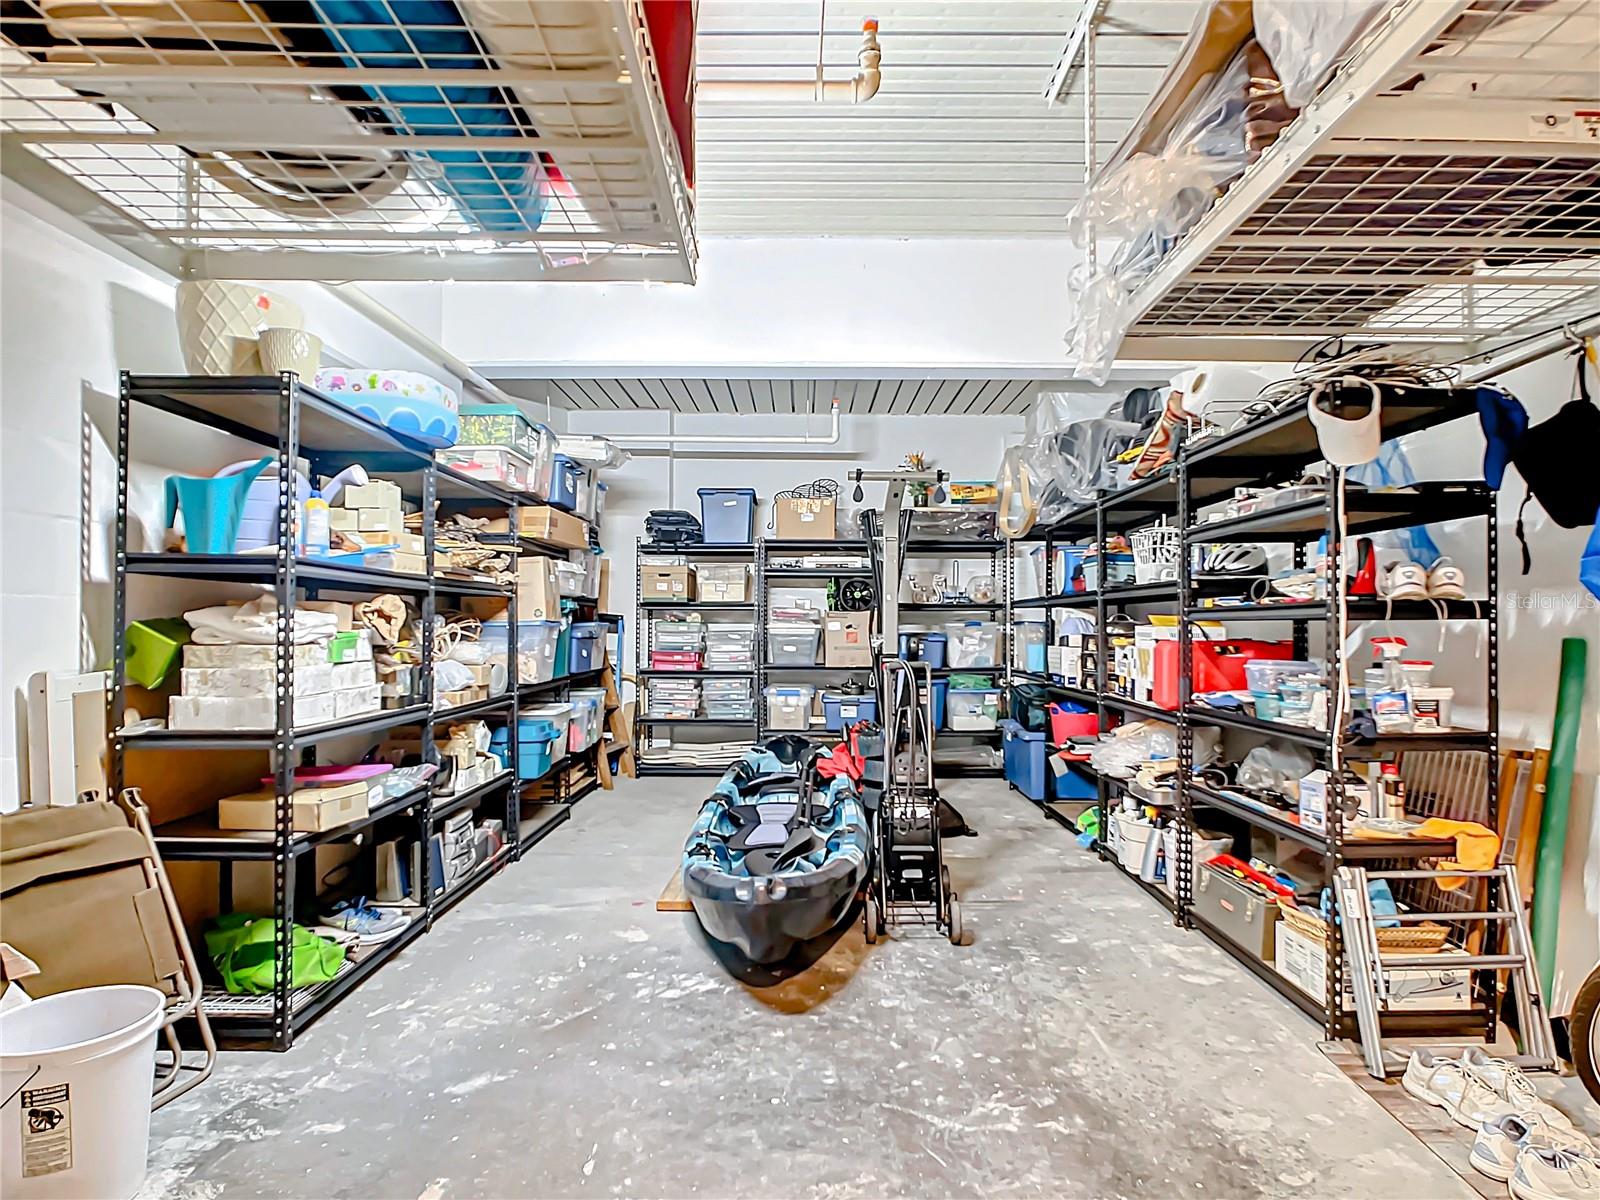 This is a closer look at how much room there is in the garage for storage, notice the overhead storage racks, so even if you have 2 cars you have storage space.